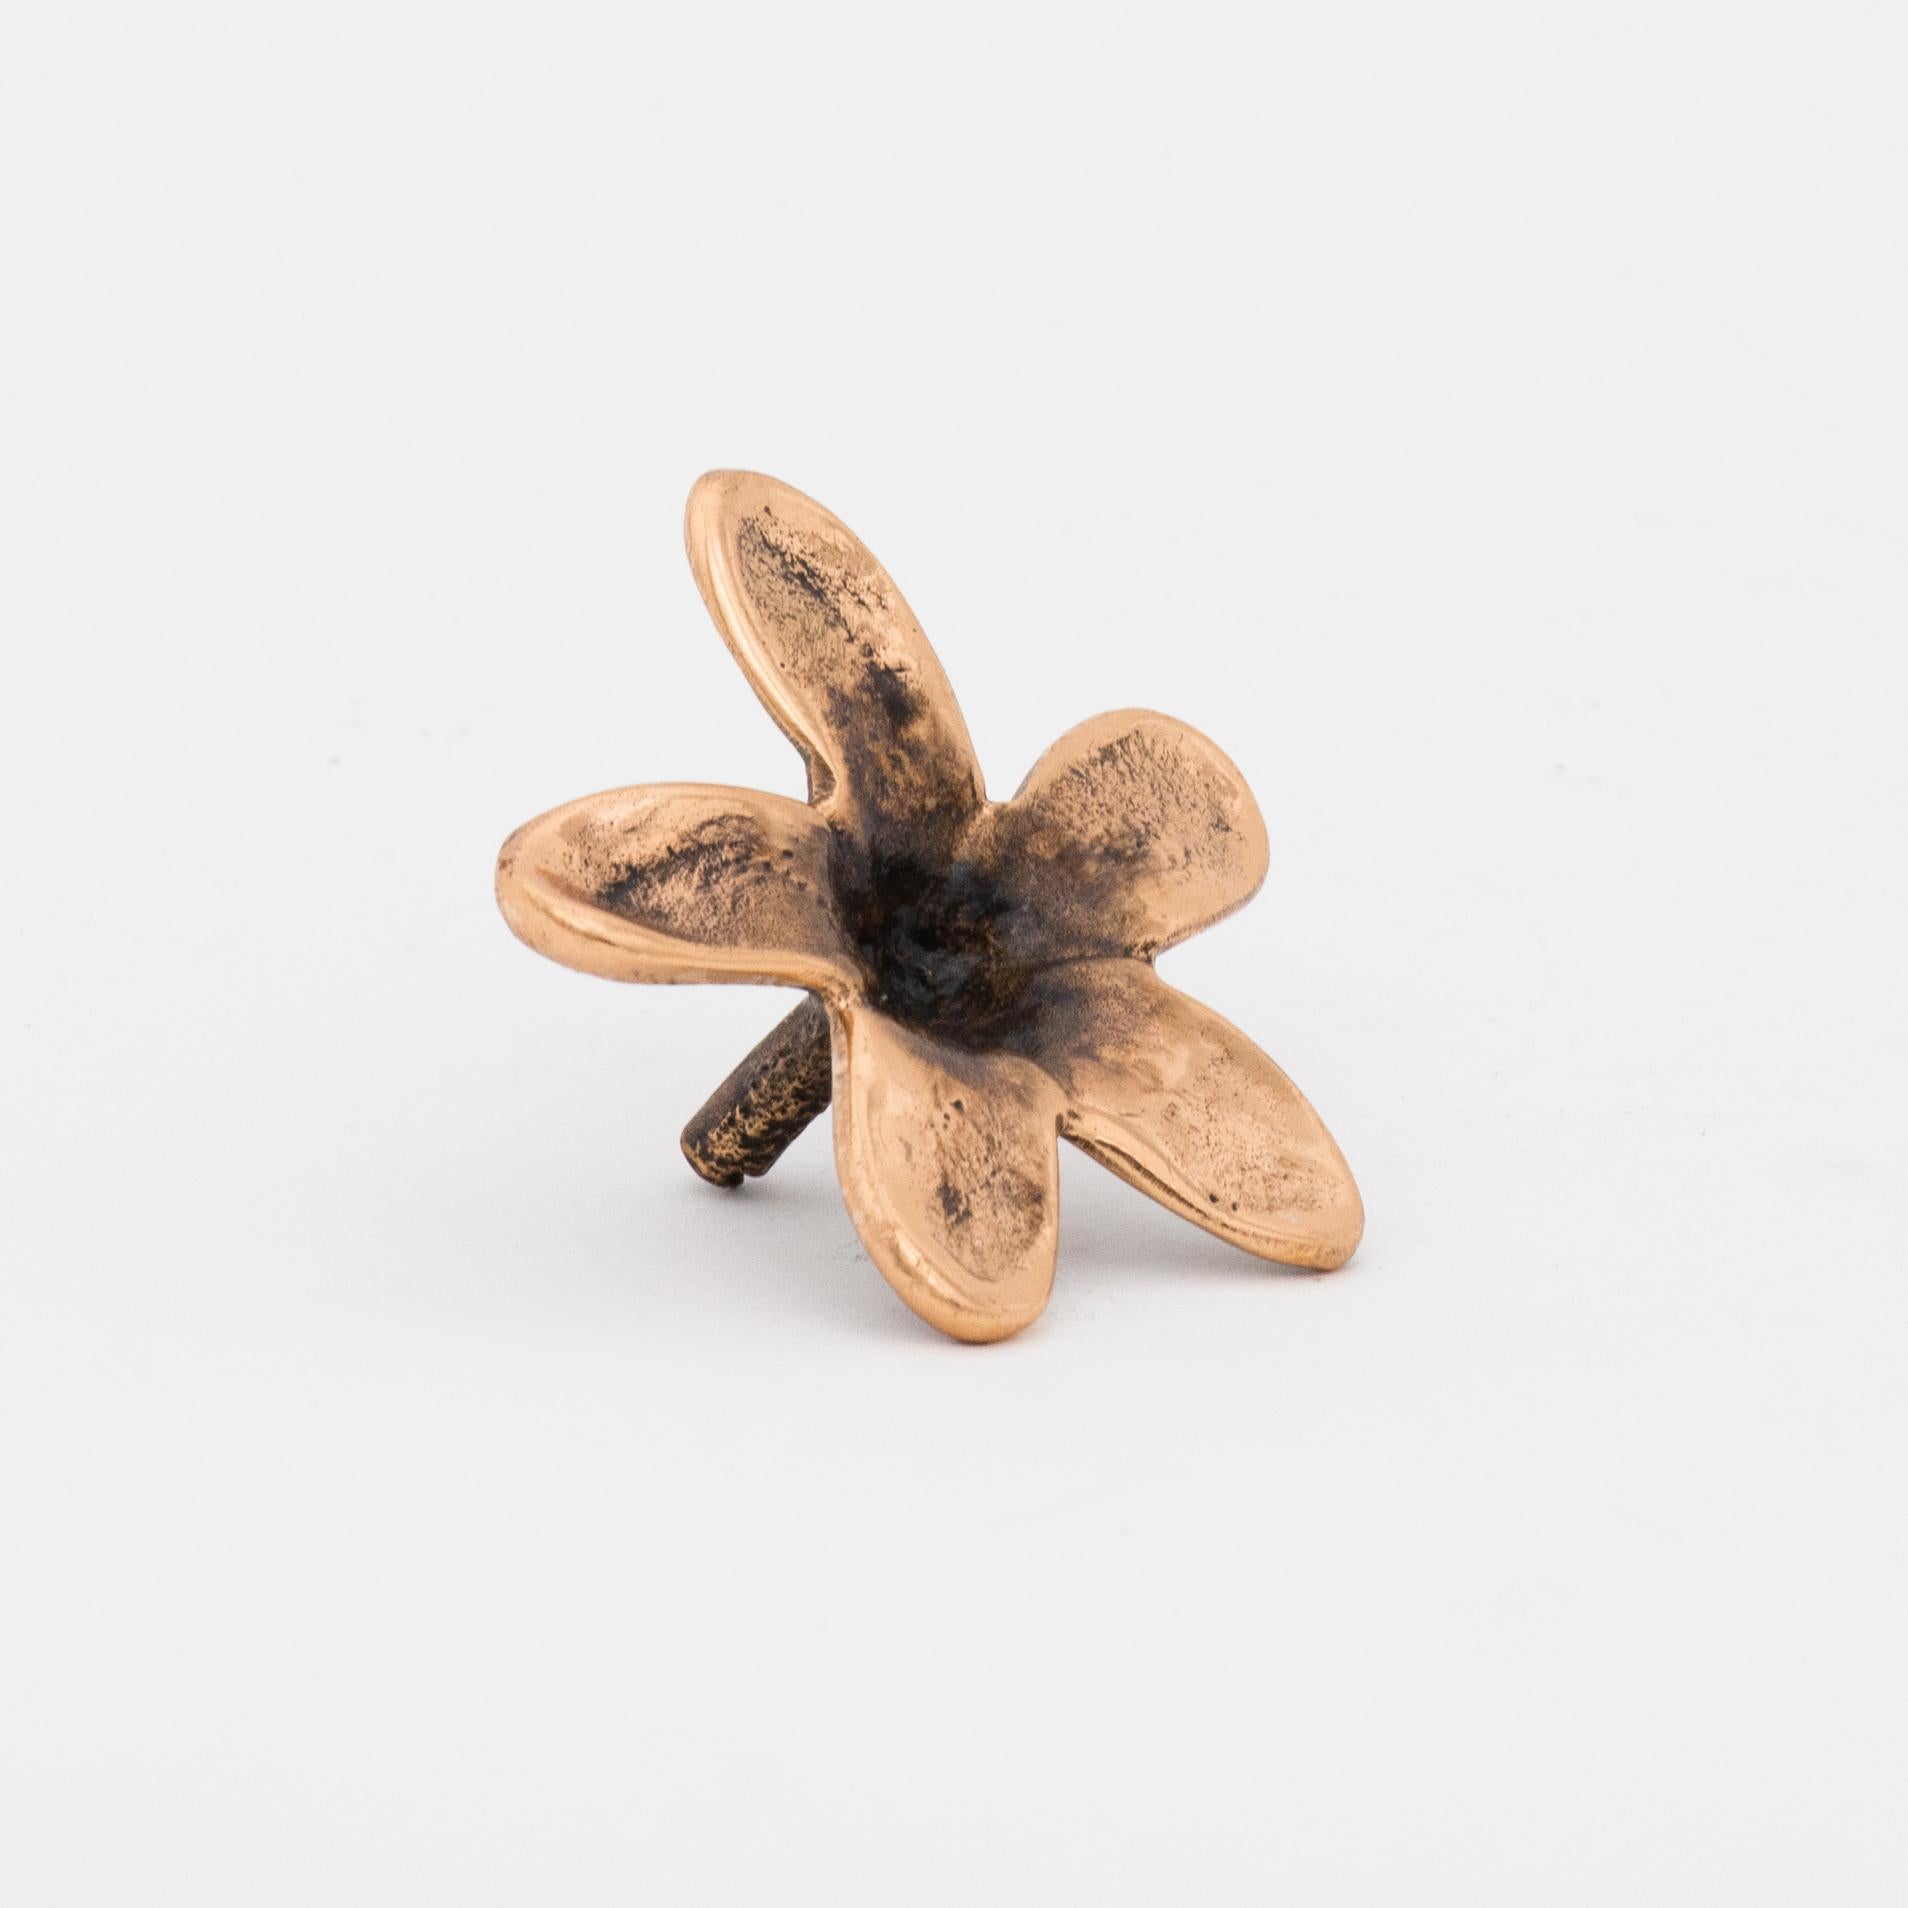 Created by The Design Foundry.

Each of these exquisite brass flowers are handmade individually with incredible detail. Cast using very traditional techniques, they are finished with a bronze patina finish.

Slight variations in the patina,